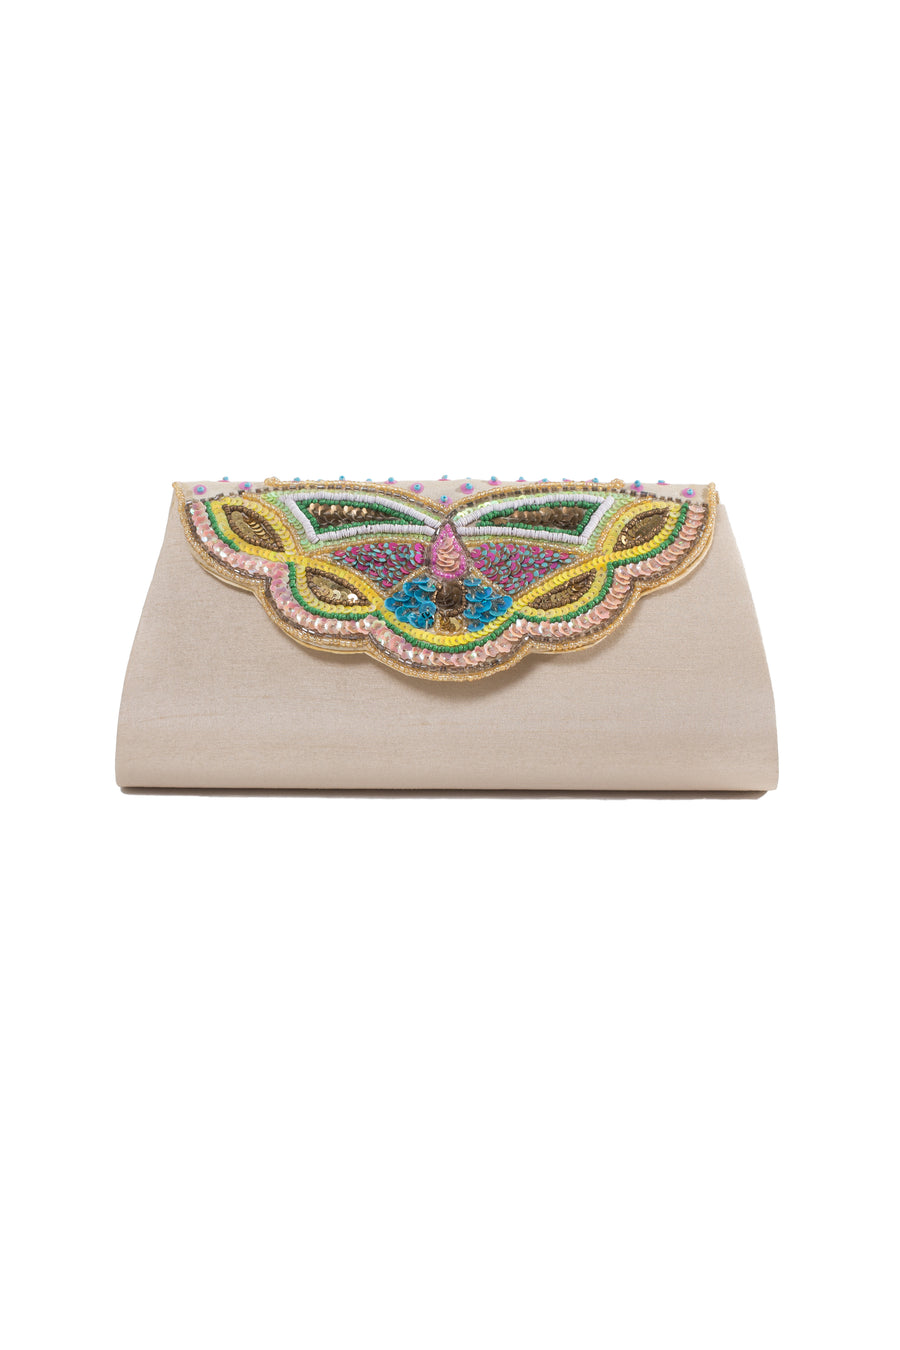 2 Chic Beaded Butterfly Clutch Purse